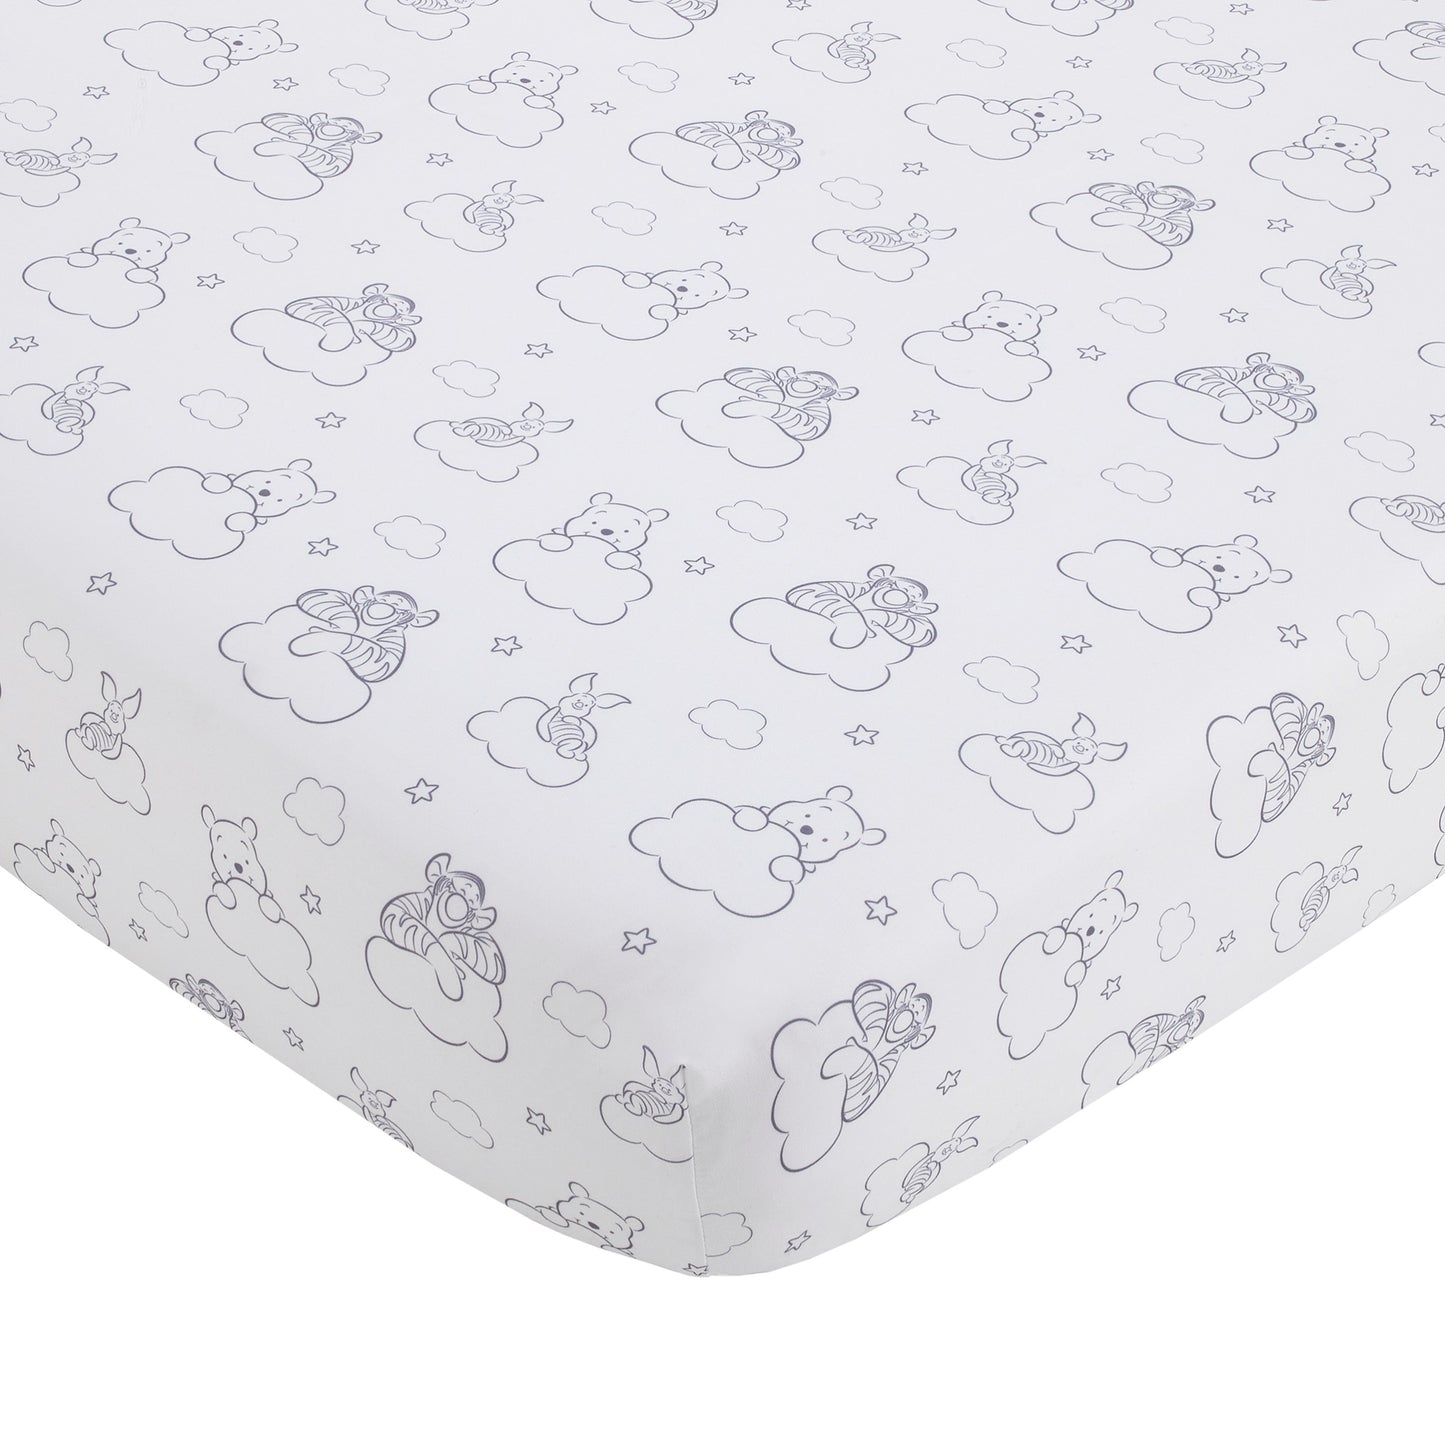 Disney Winnie the Pooh Hello Sunshine Grey and White Cloud Nursery Fitted Crib Sheet with Piglet and Tigger